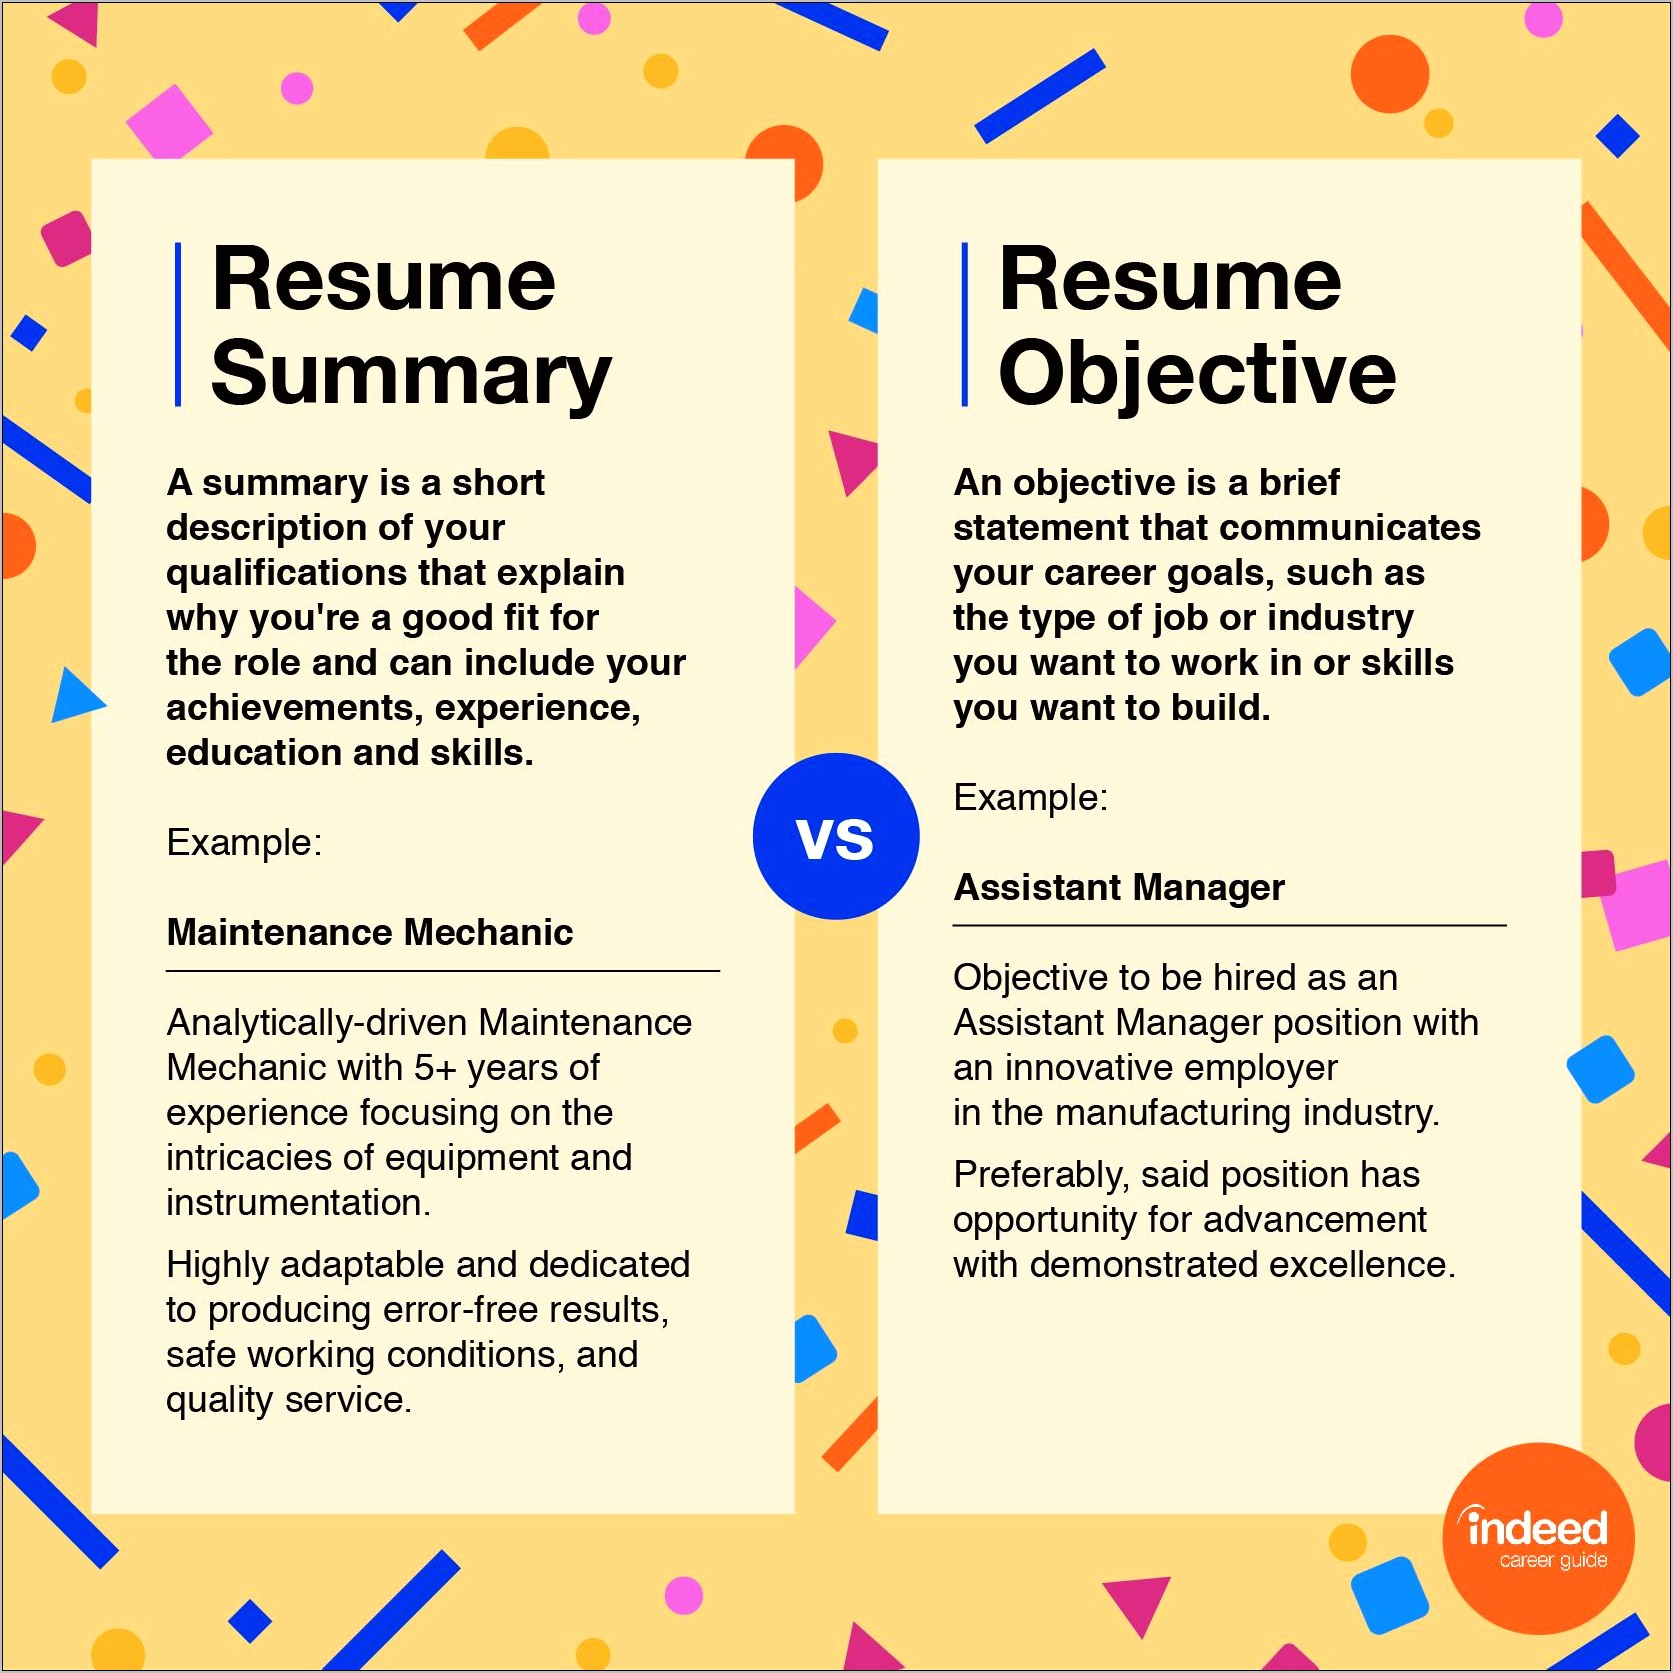 Example Of Resume Objective Statements For Sales